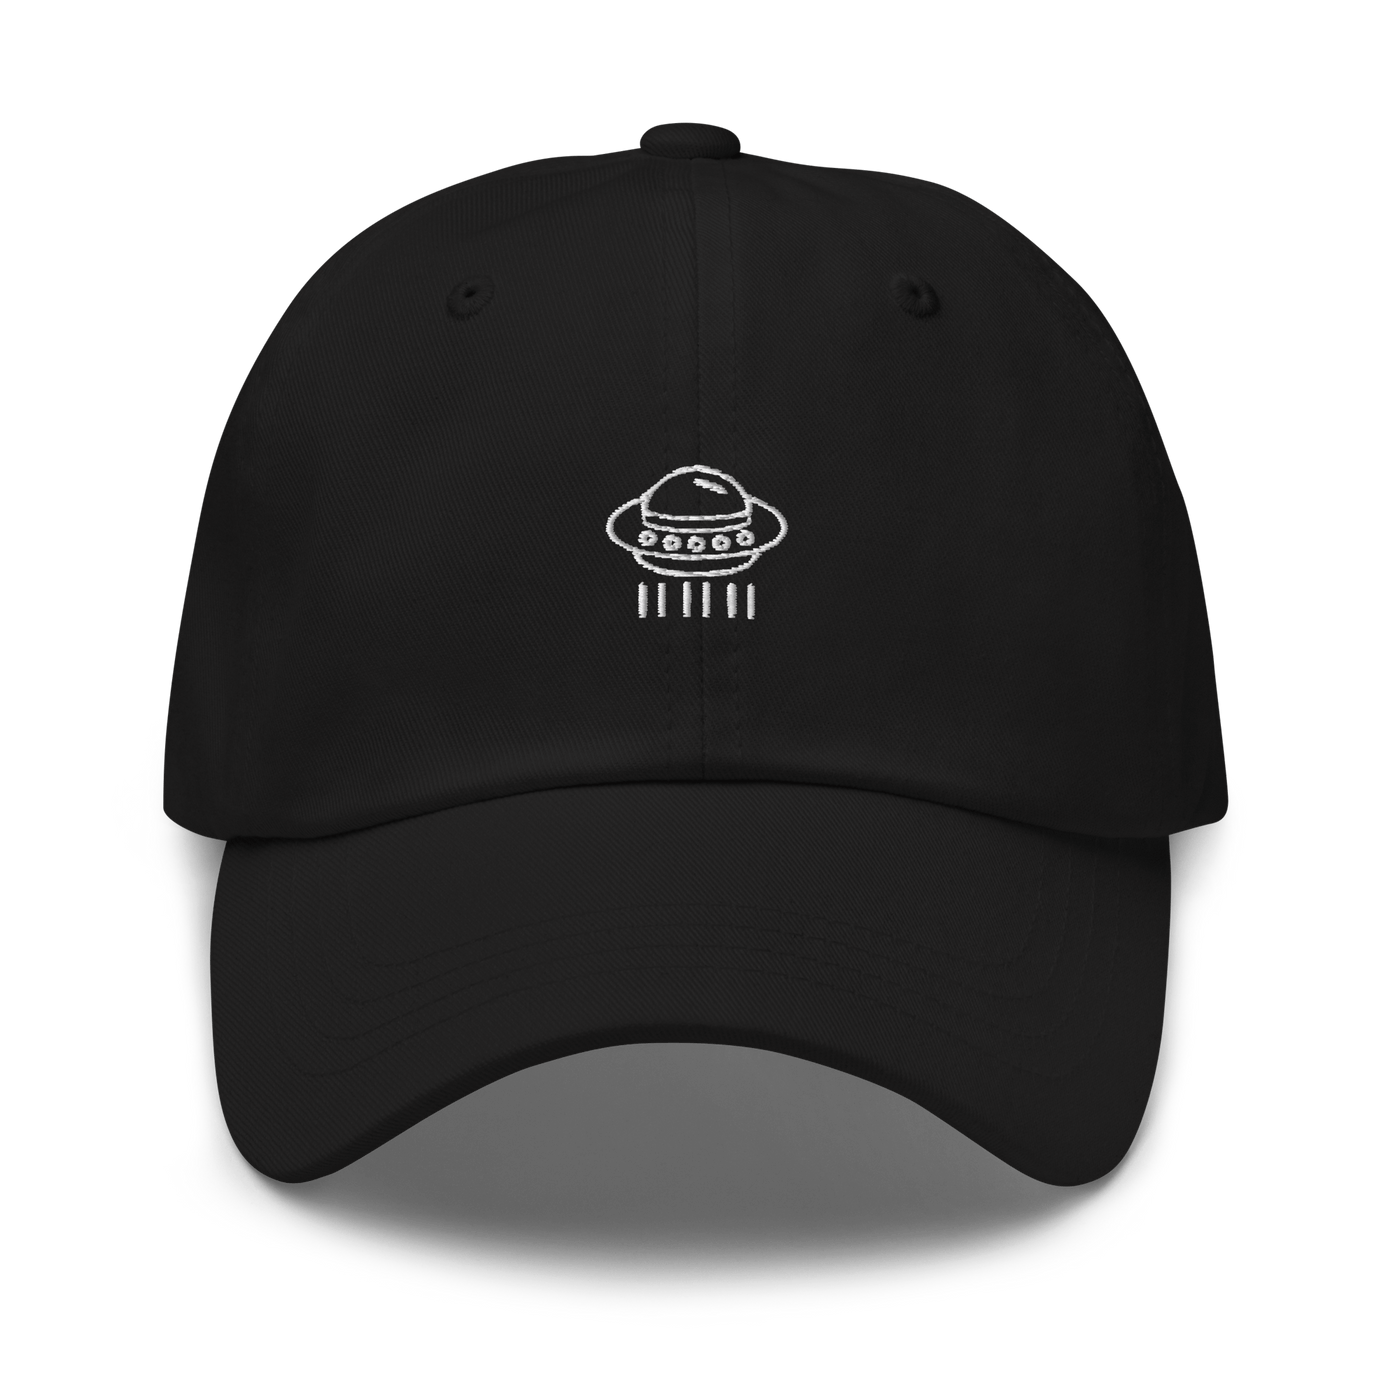 UFO Dad hat - Black - - Just Another Cap Store